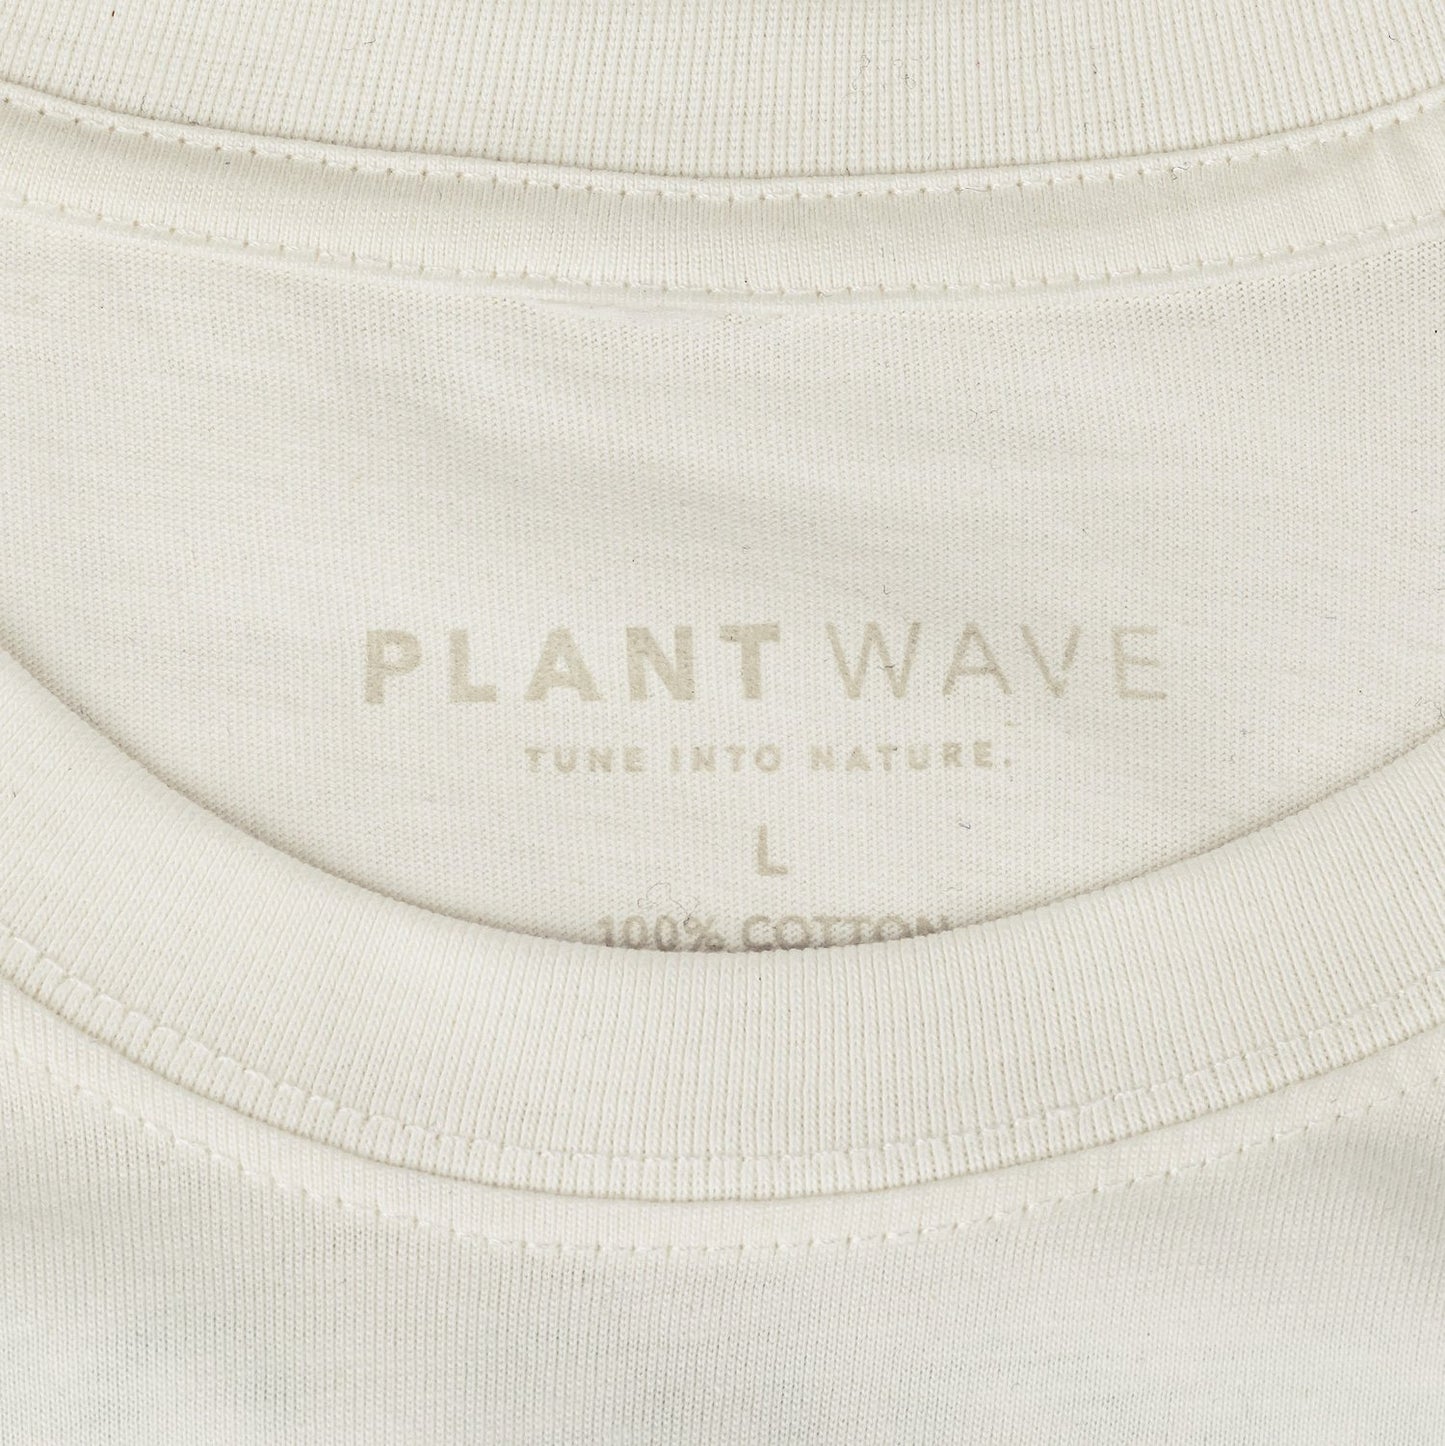 PLANTS ARE HERE TO TEACH US TO LISTEN™ TEE